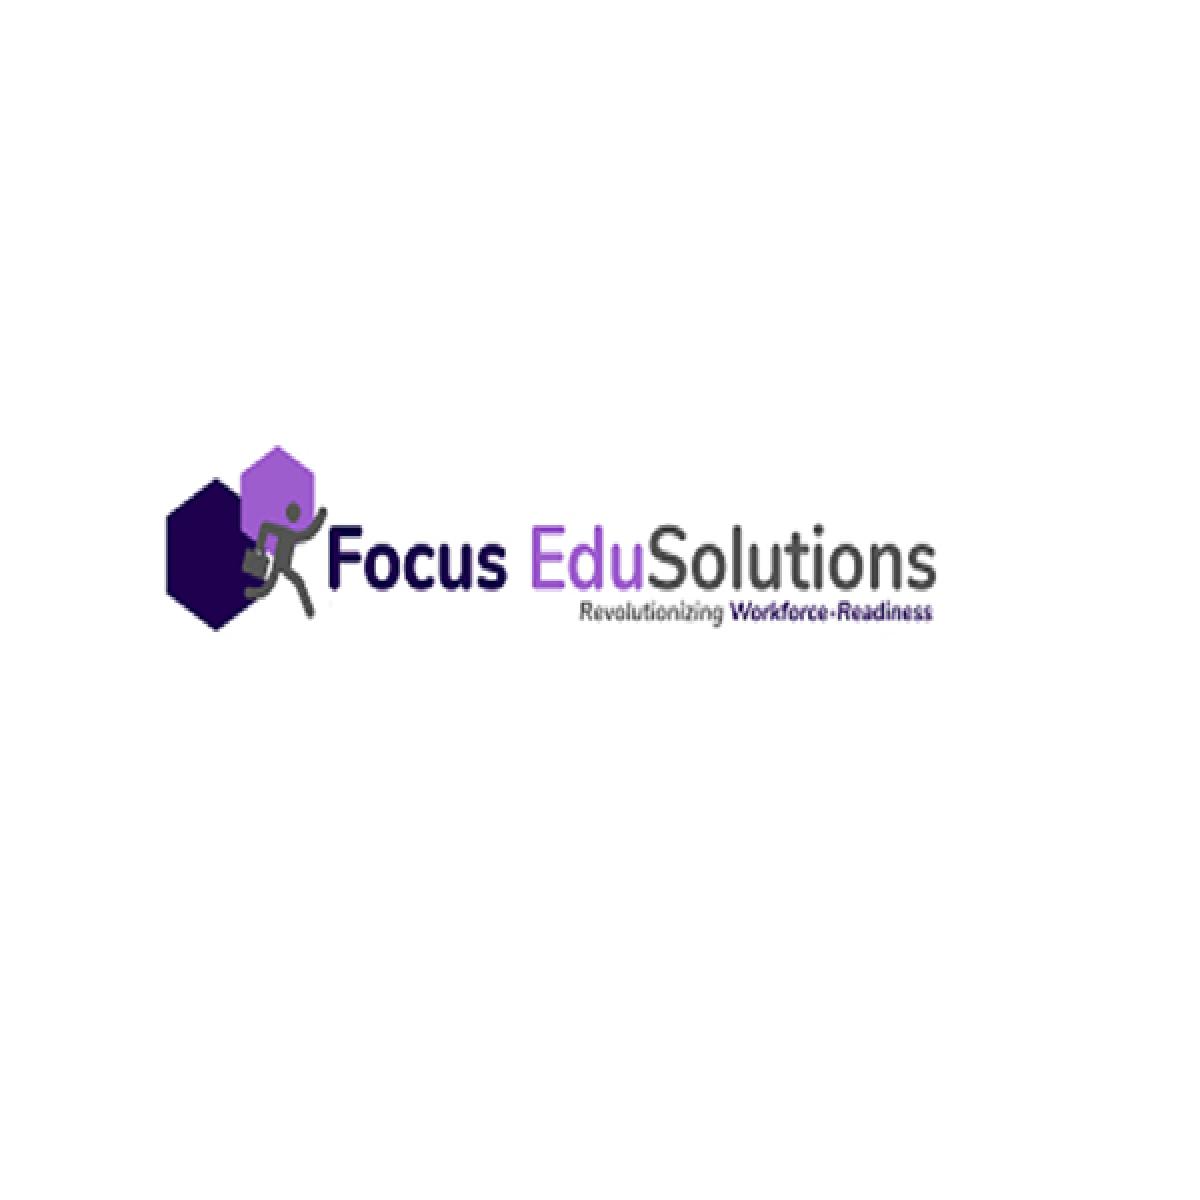 Focus EduSolutions Is Partnering With an American University to Offer Smart Manufacturing Credentials to Indian Students